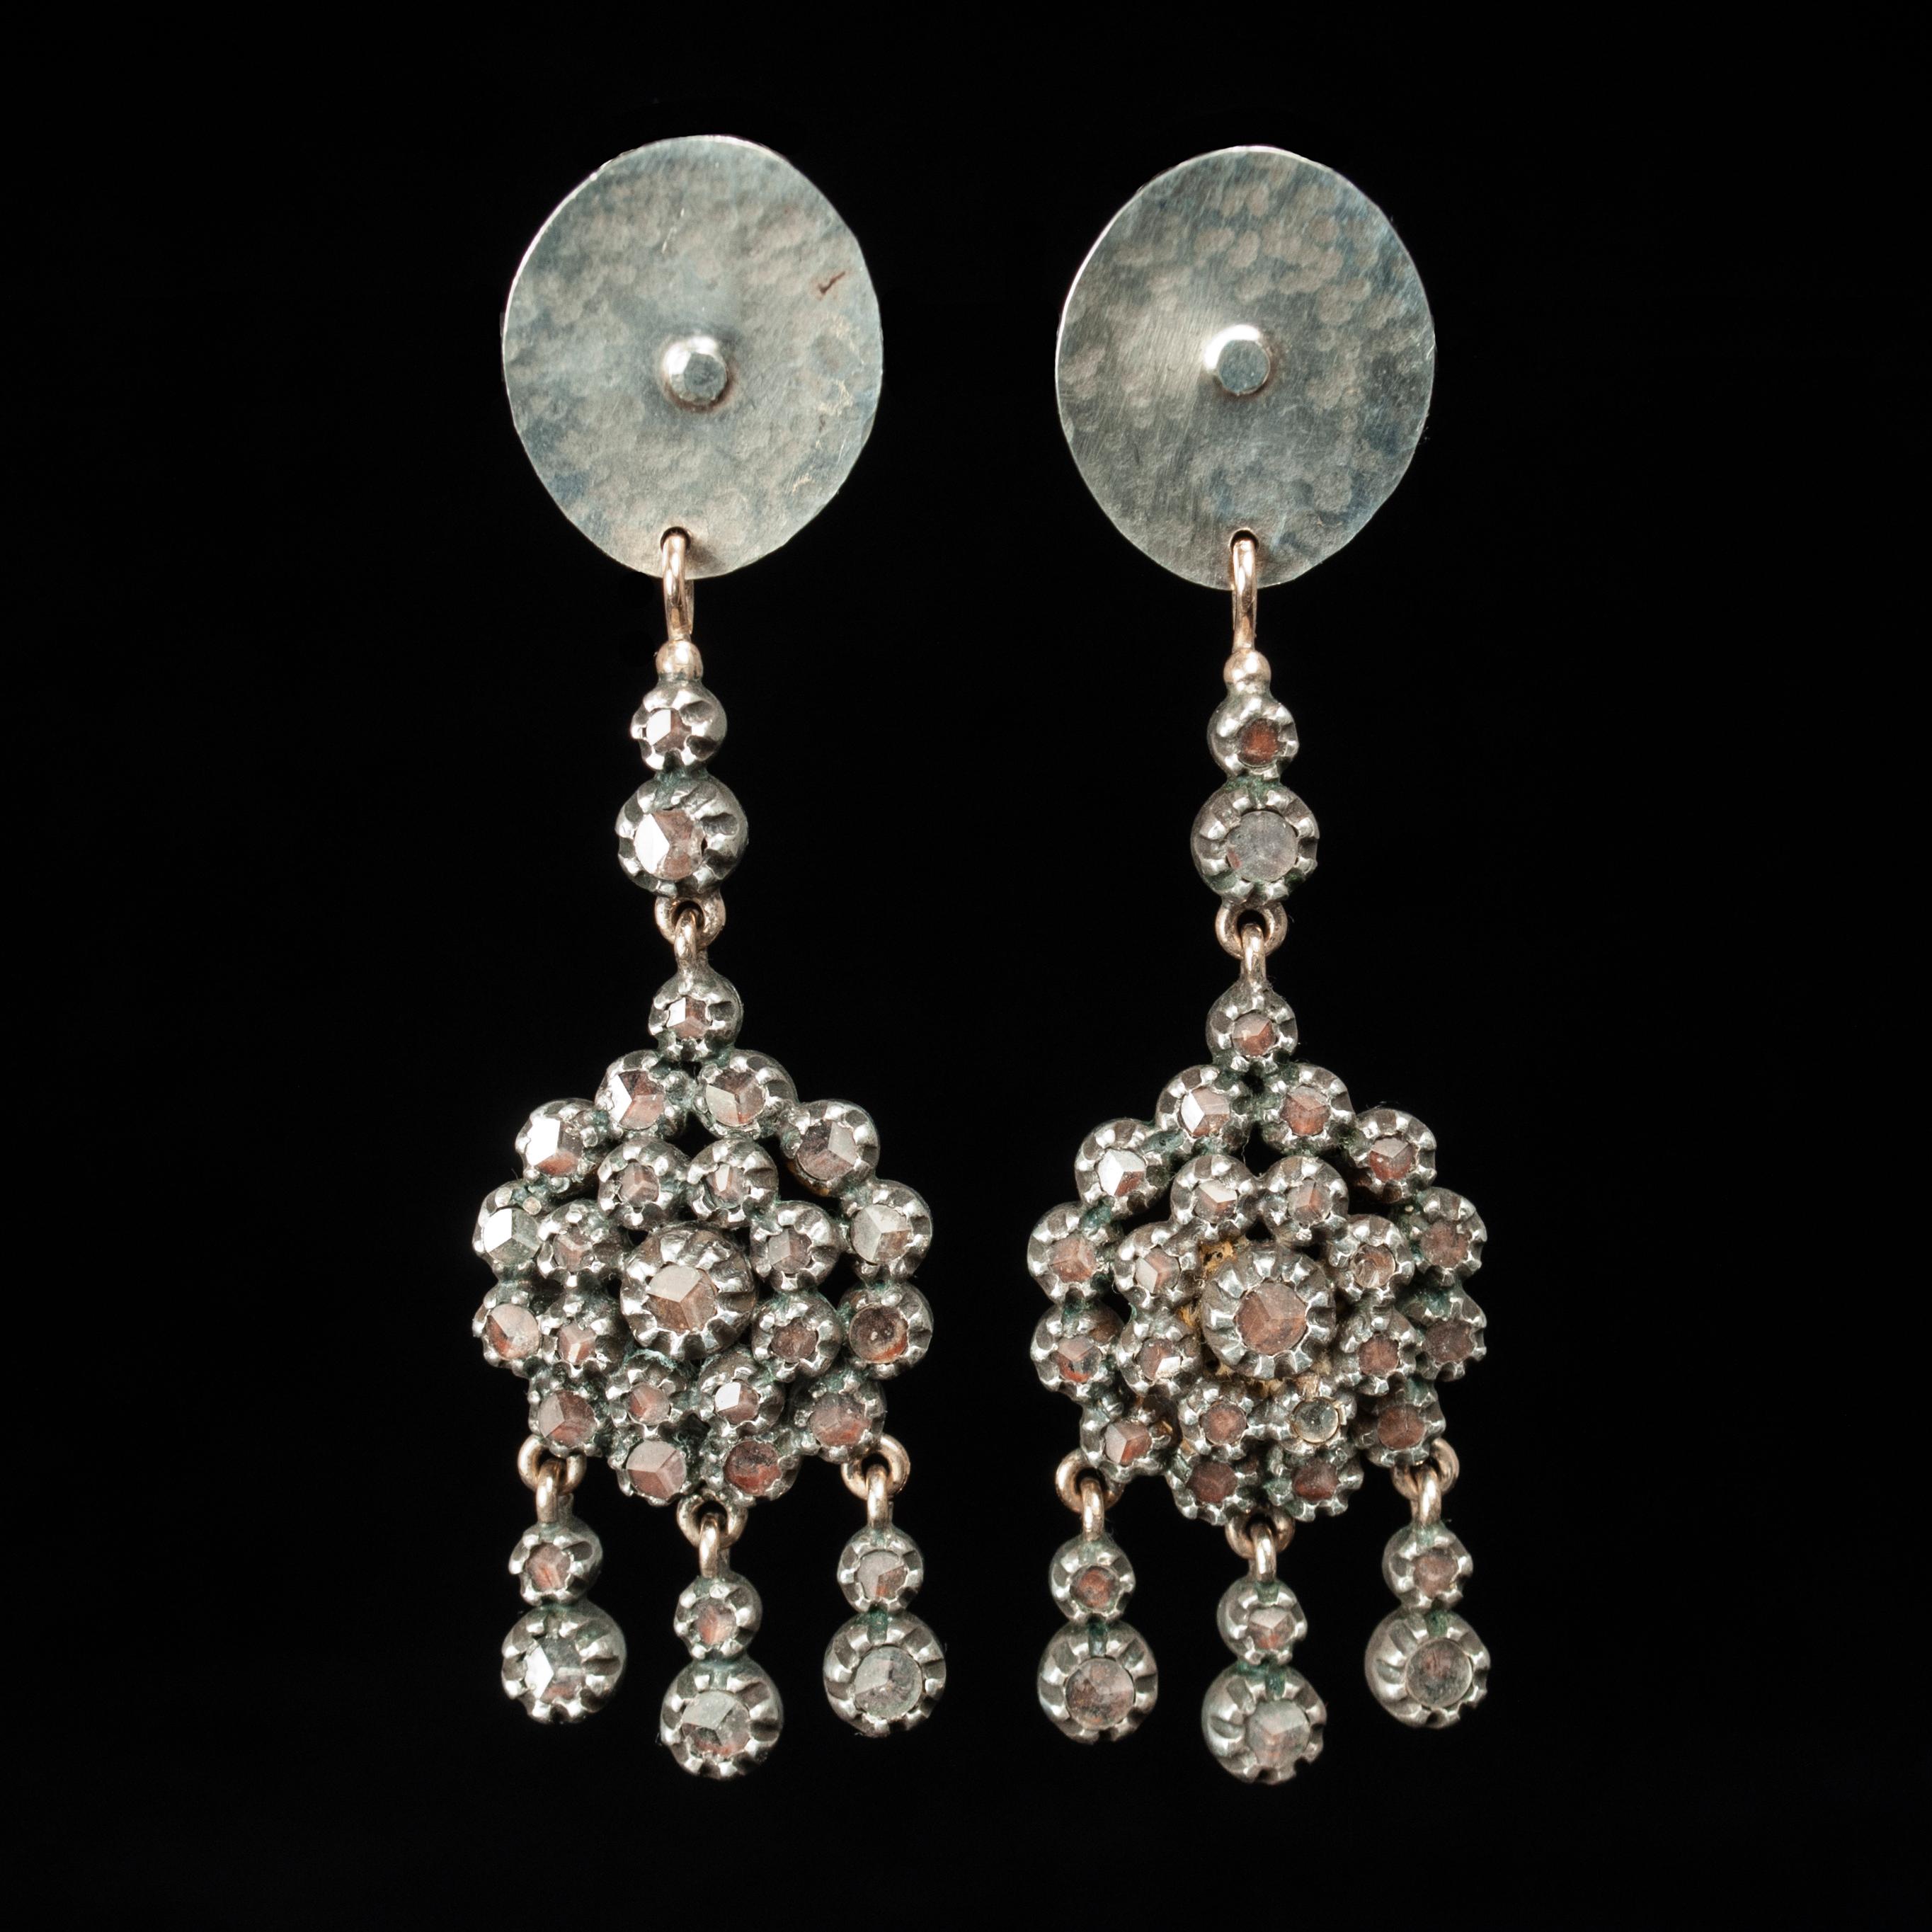 Sparkling silver and glass south Indian drop earrings by Jewels

A pair of sparkling drop earrings by Jewels of Santa Fe/Marrakesh, composed of cut glass with a slight pink tone set in silver from South India, attached to a hand-hammered oval